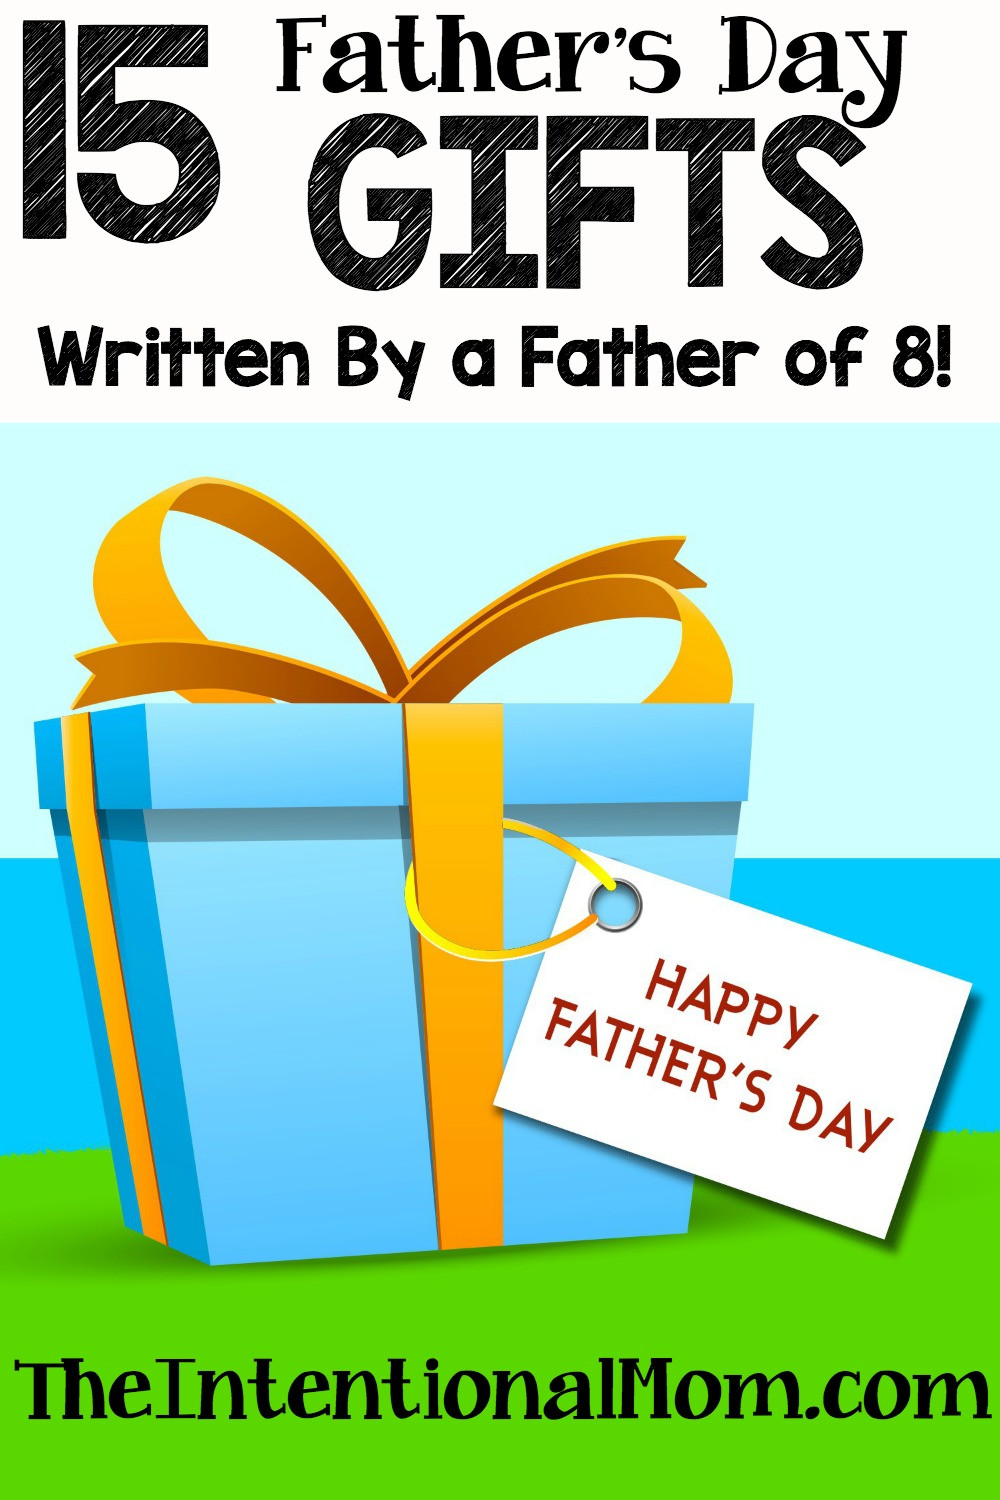 Most Popular Fathers Day Gifts
 The Five Most Popular Posts This Week 5 22 16